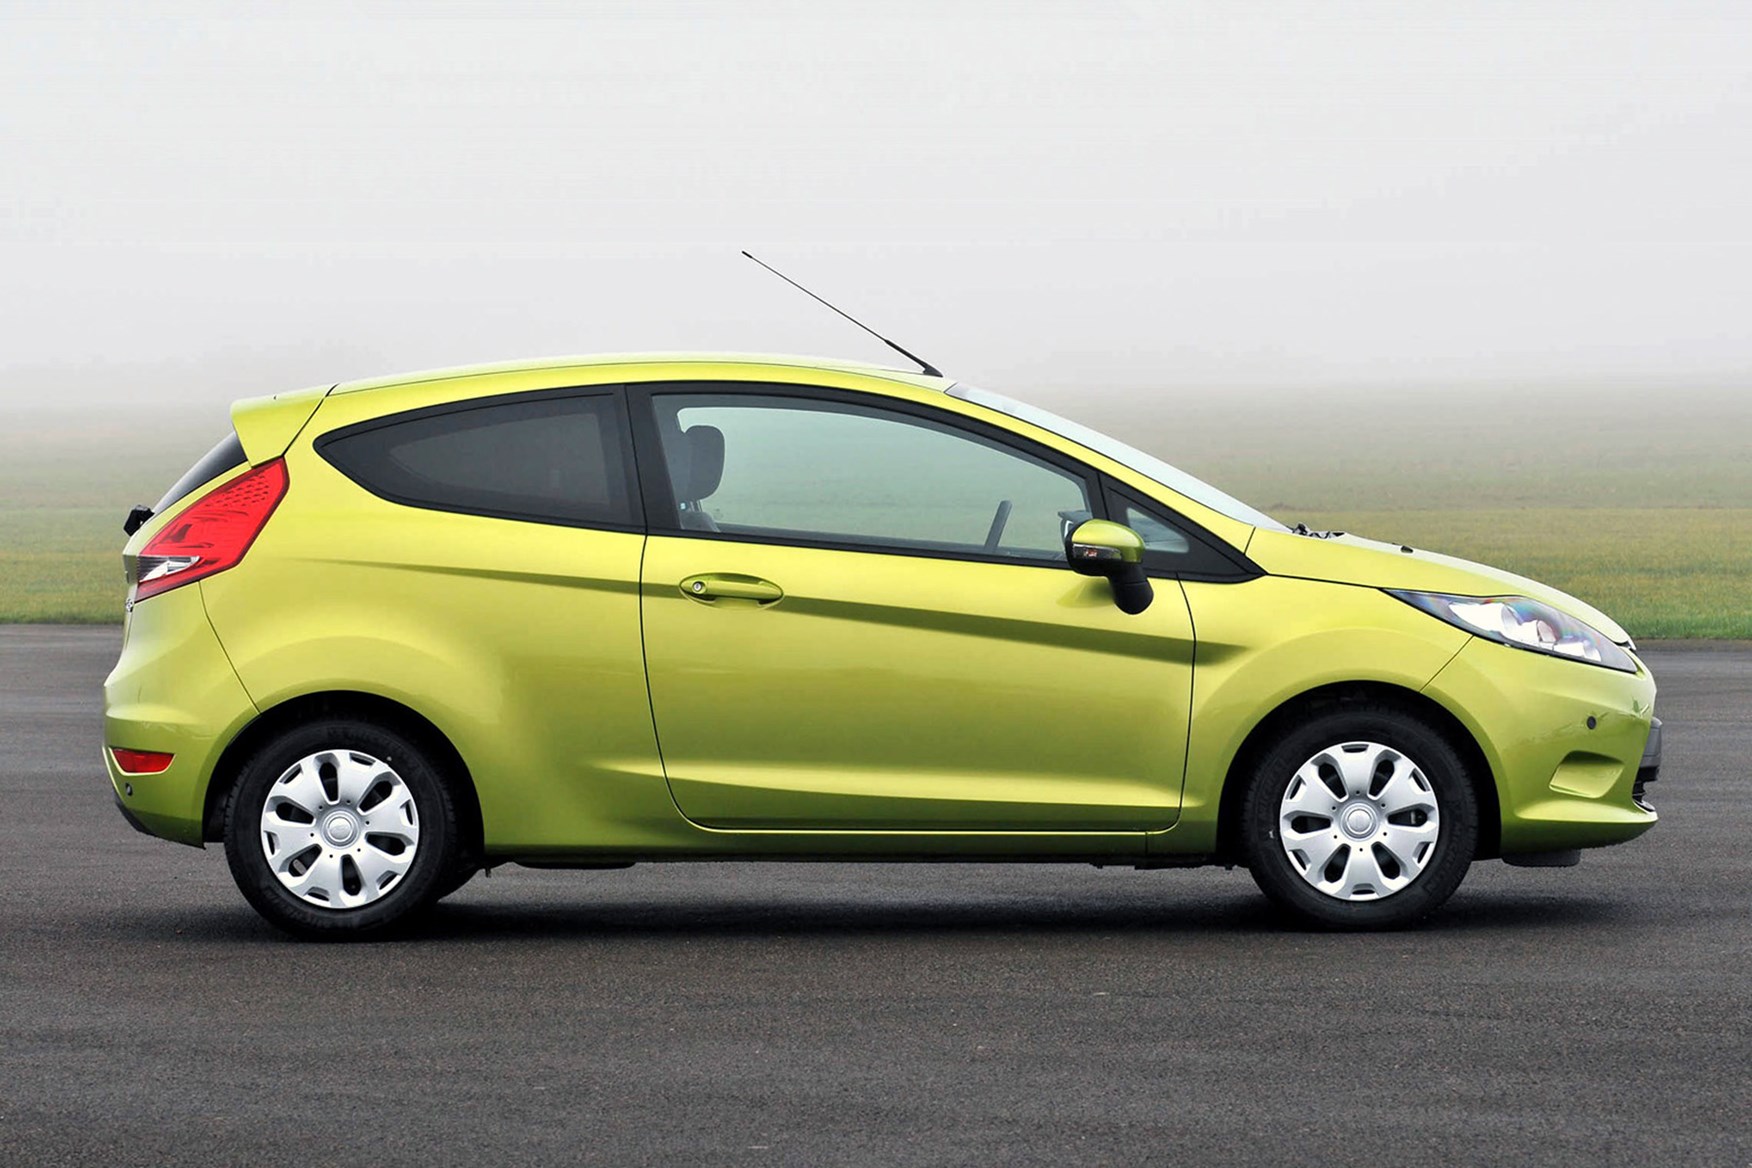 Ford Fiesta: which version is best? | Parkers